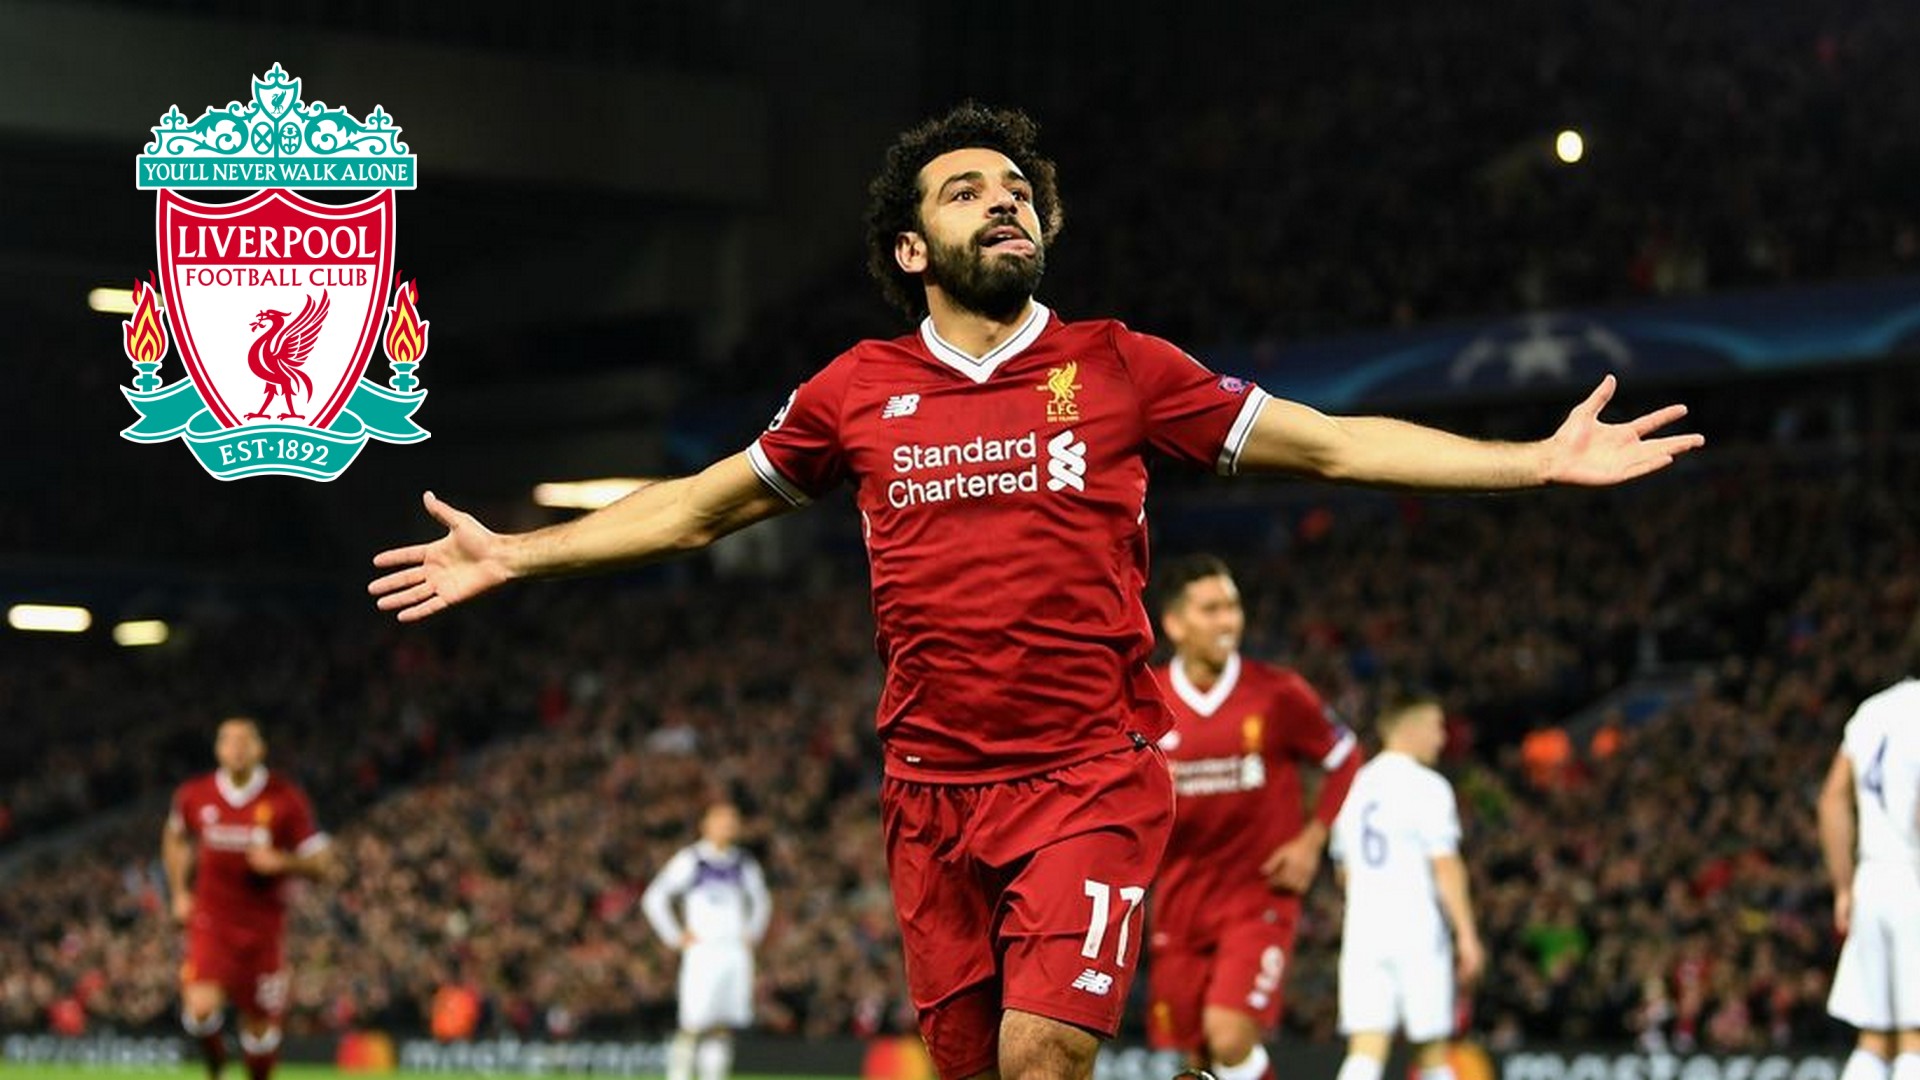 Mohamed Salah Liverpool Wallpaper with resolution 1920X1080 pixel. You can use this wallpaper as background for your desktop Computer Screensavers, Android or iPhone smartphones